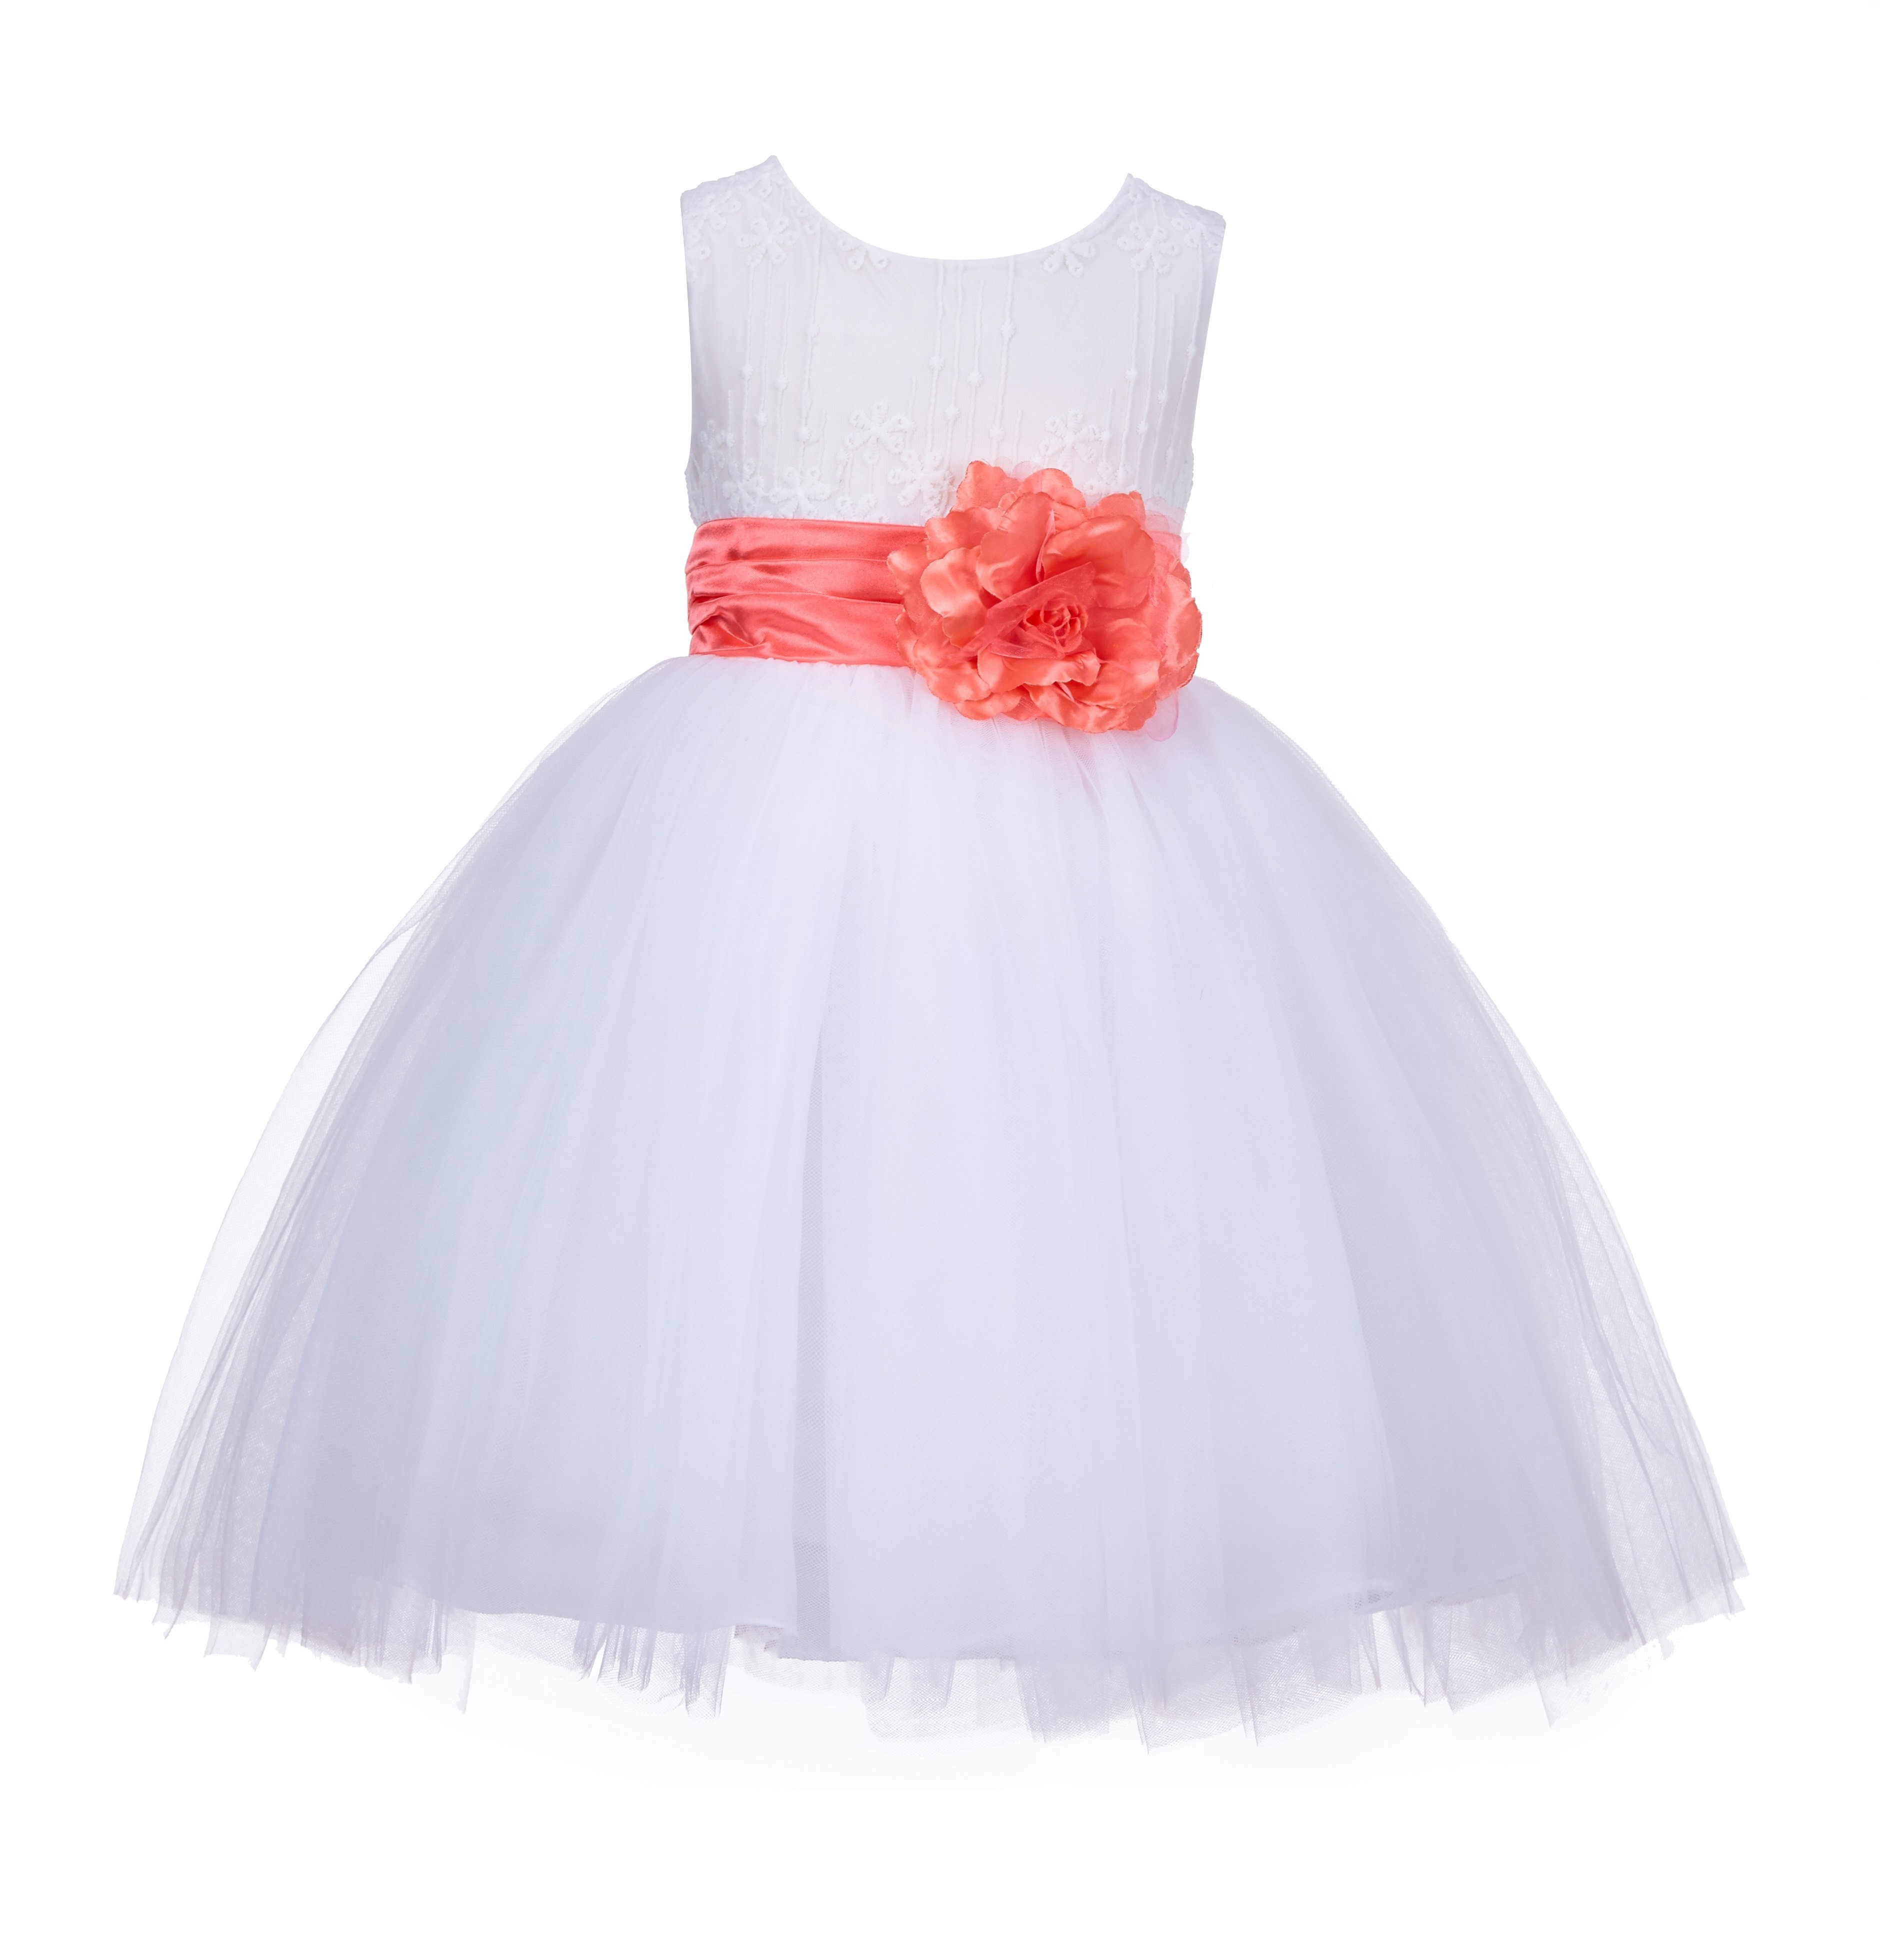 White/Coral Lace Embroidery Tulle Flower Girl Dress Wedding 118